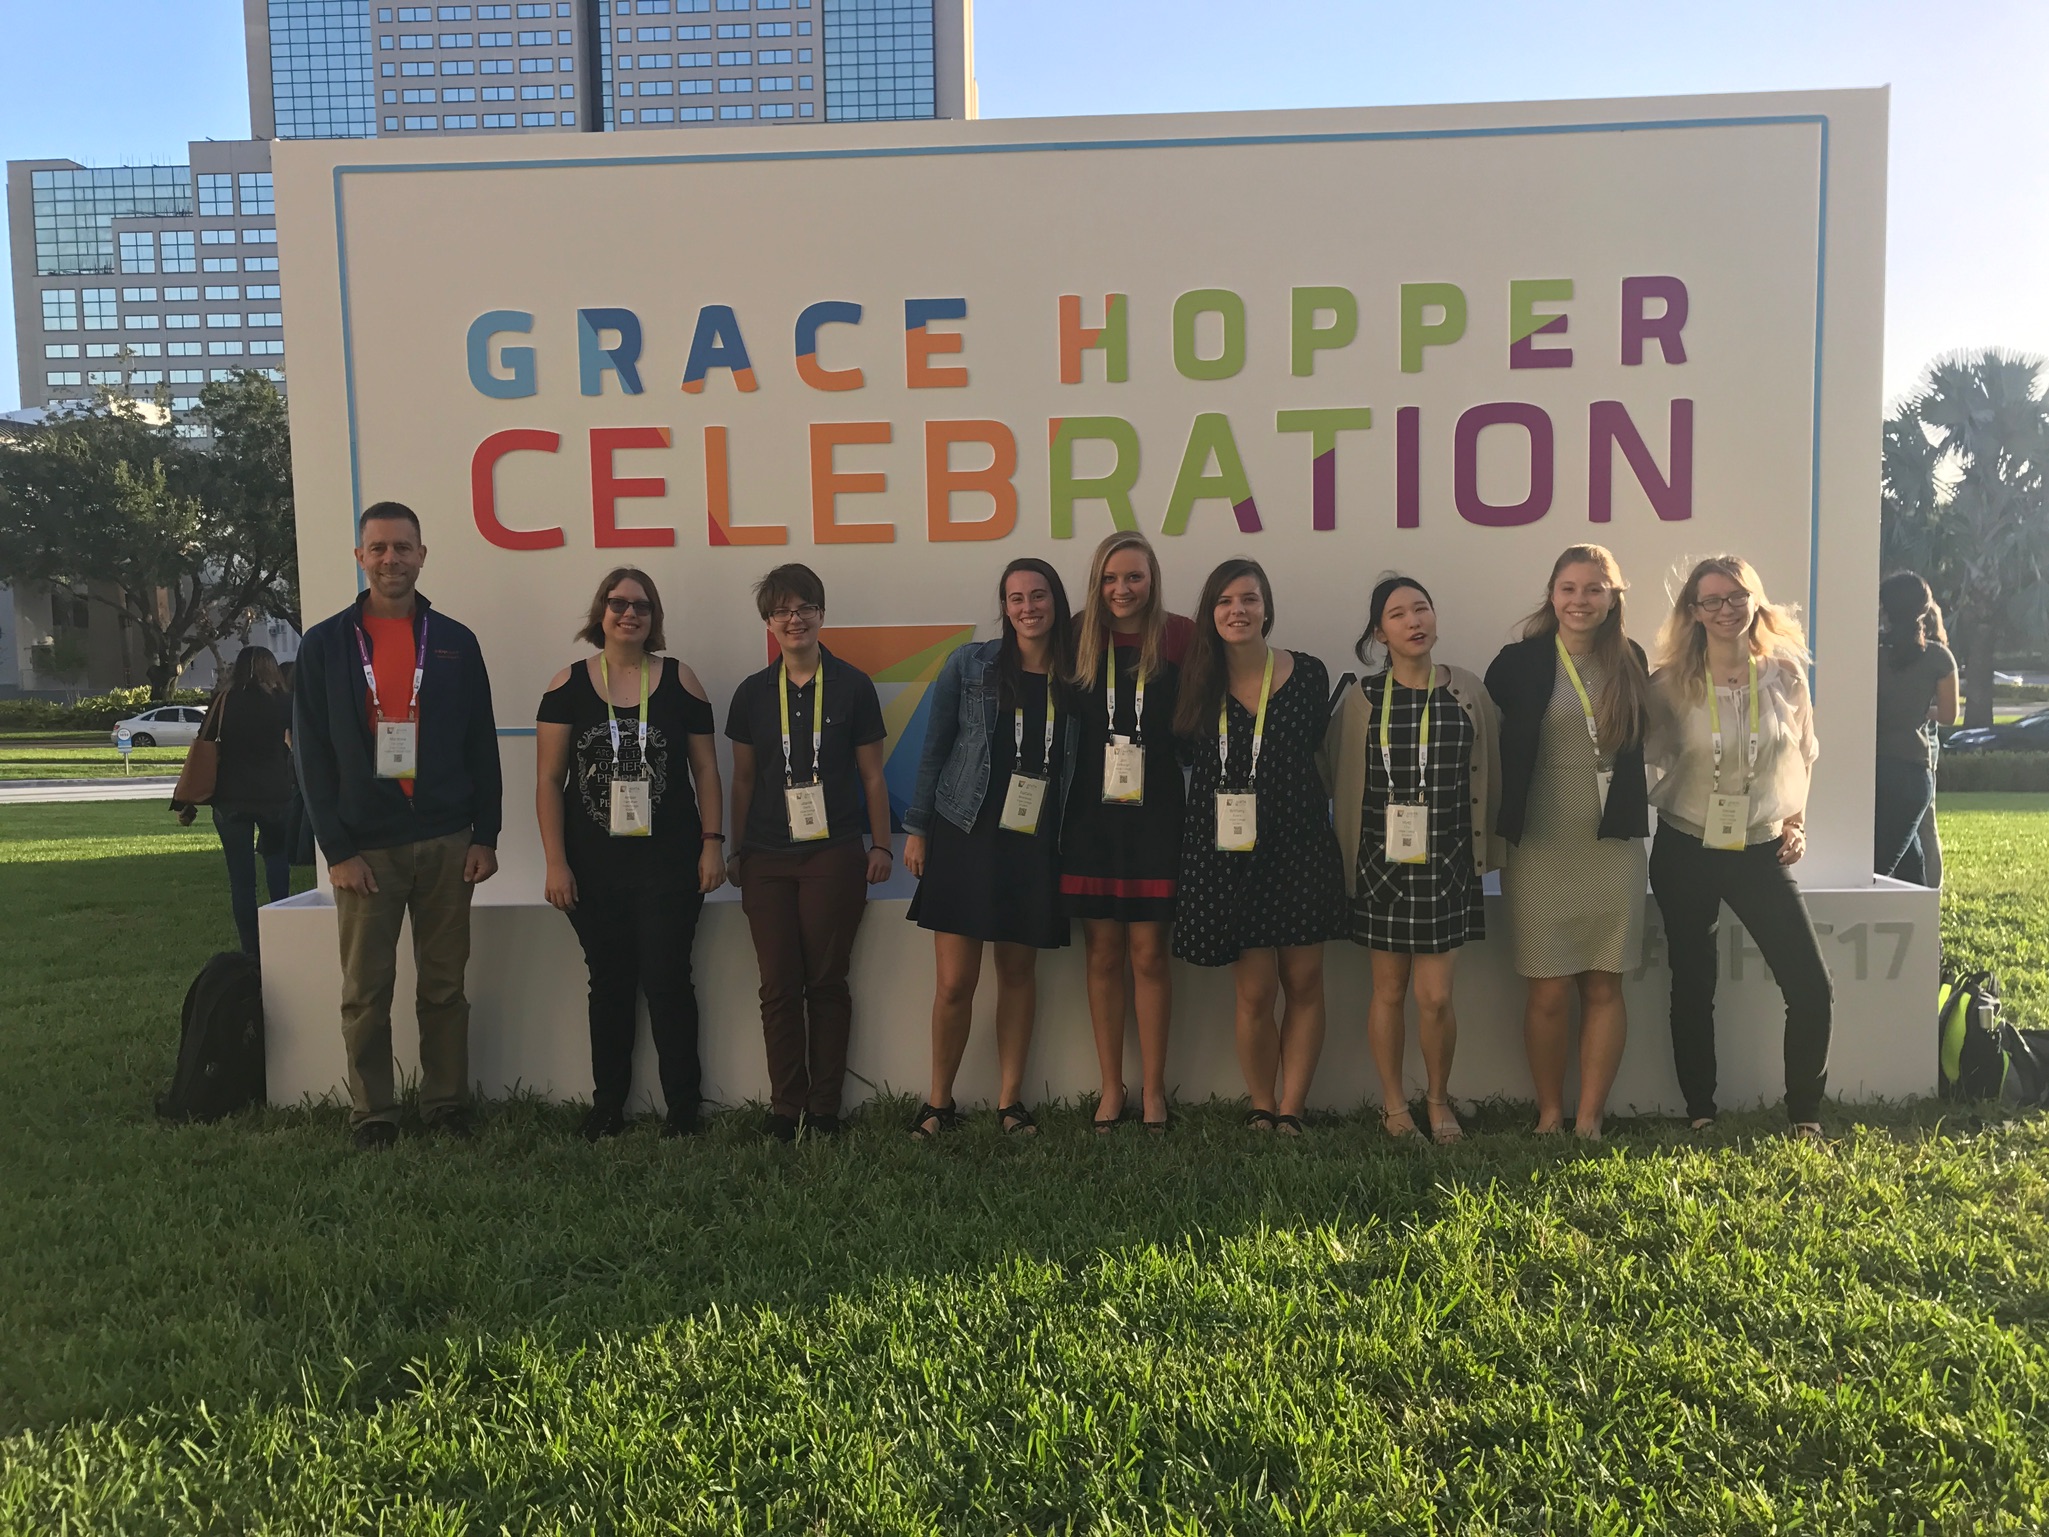 Students celebrate women in technology at Grace Hopper Conference